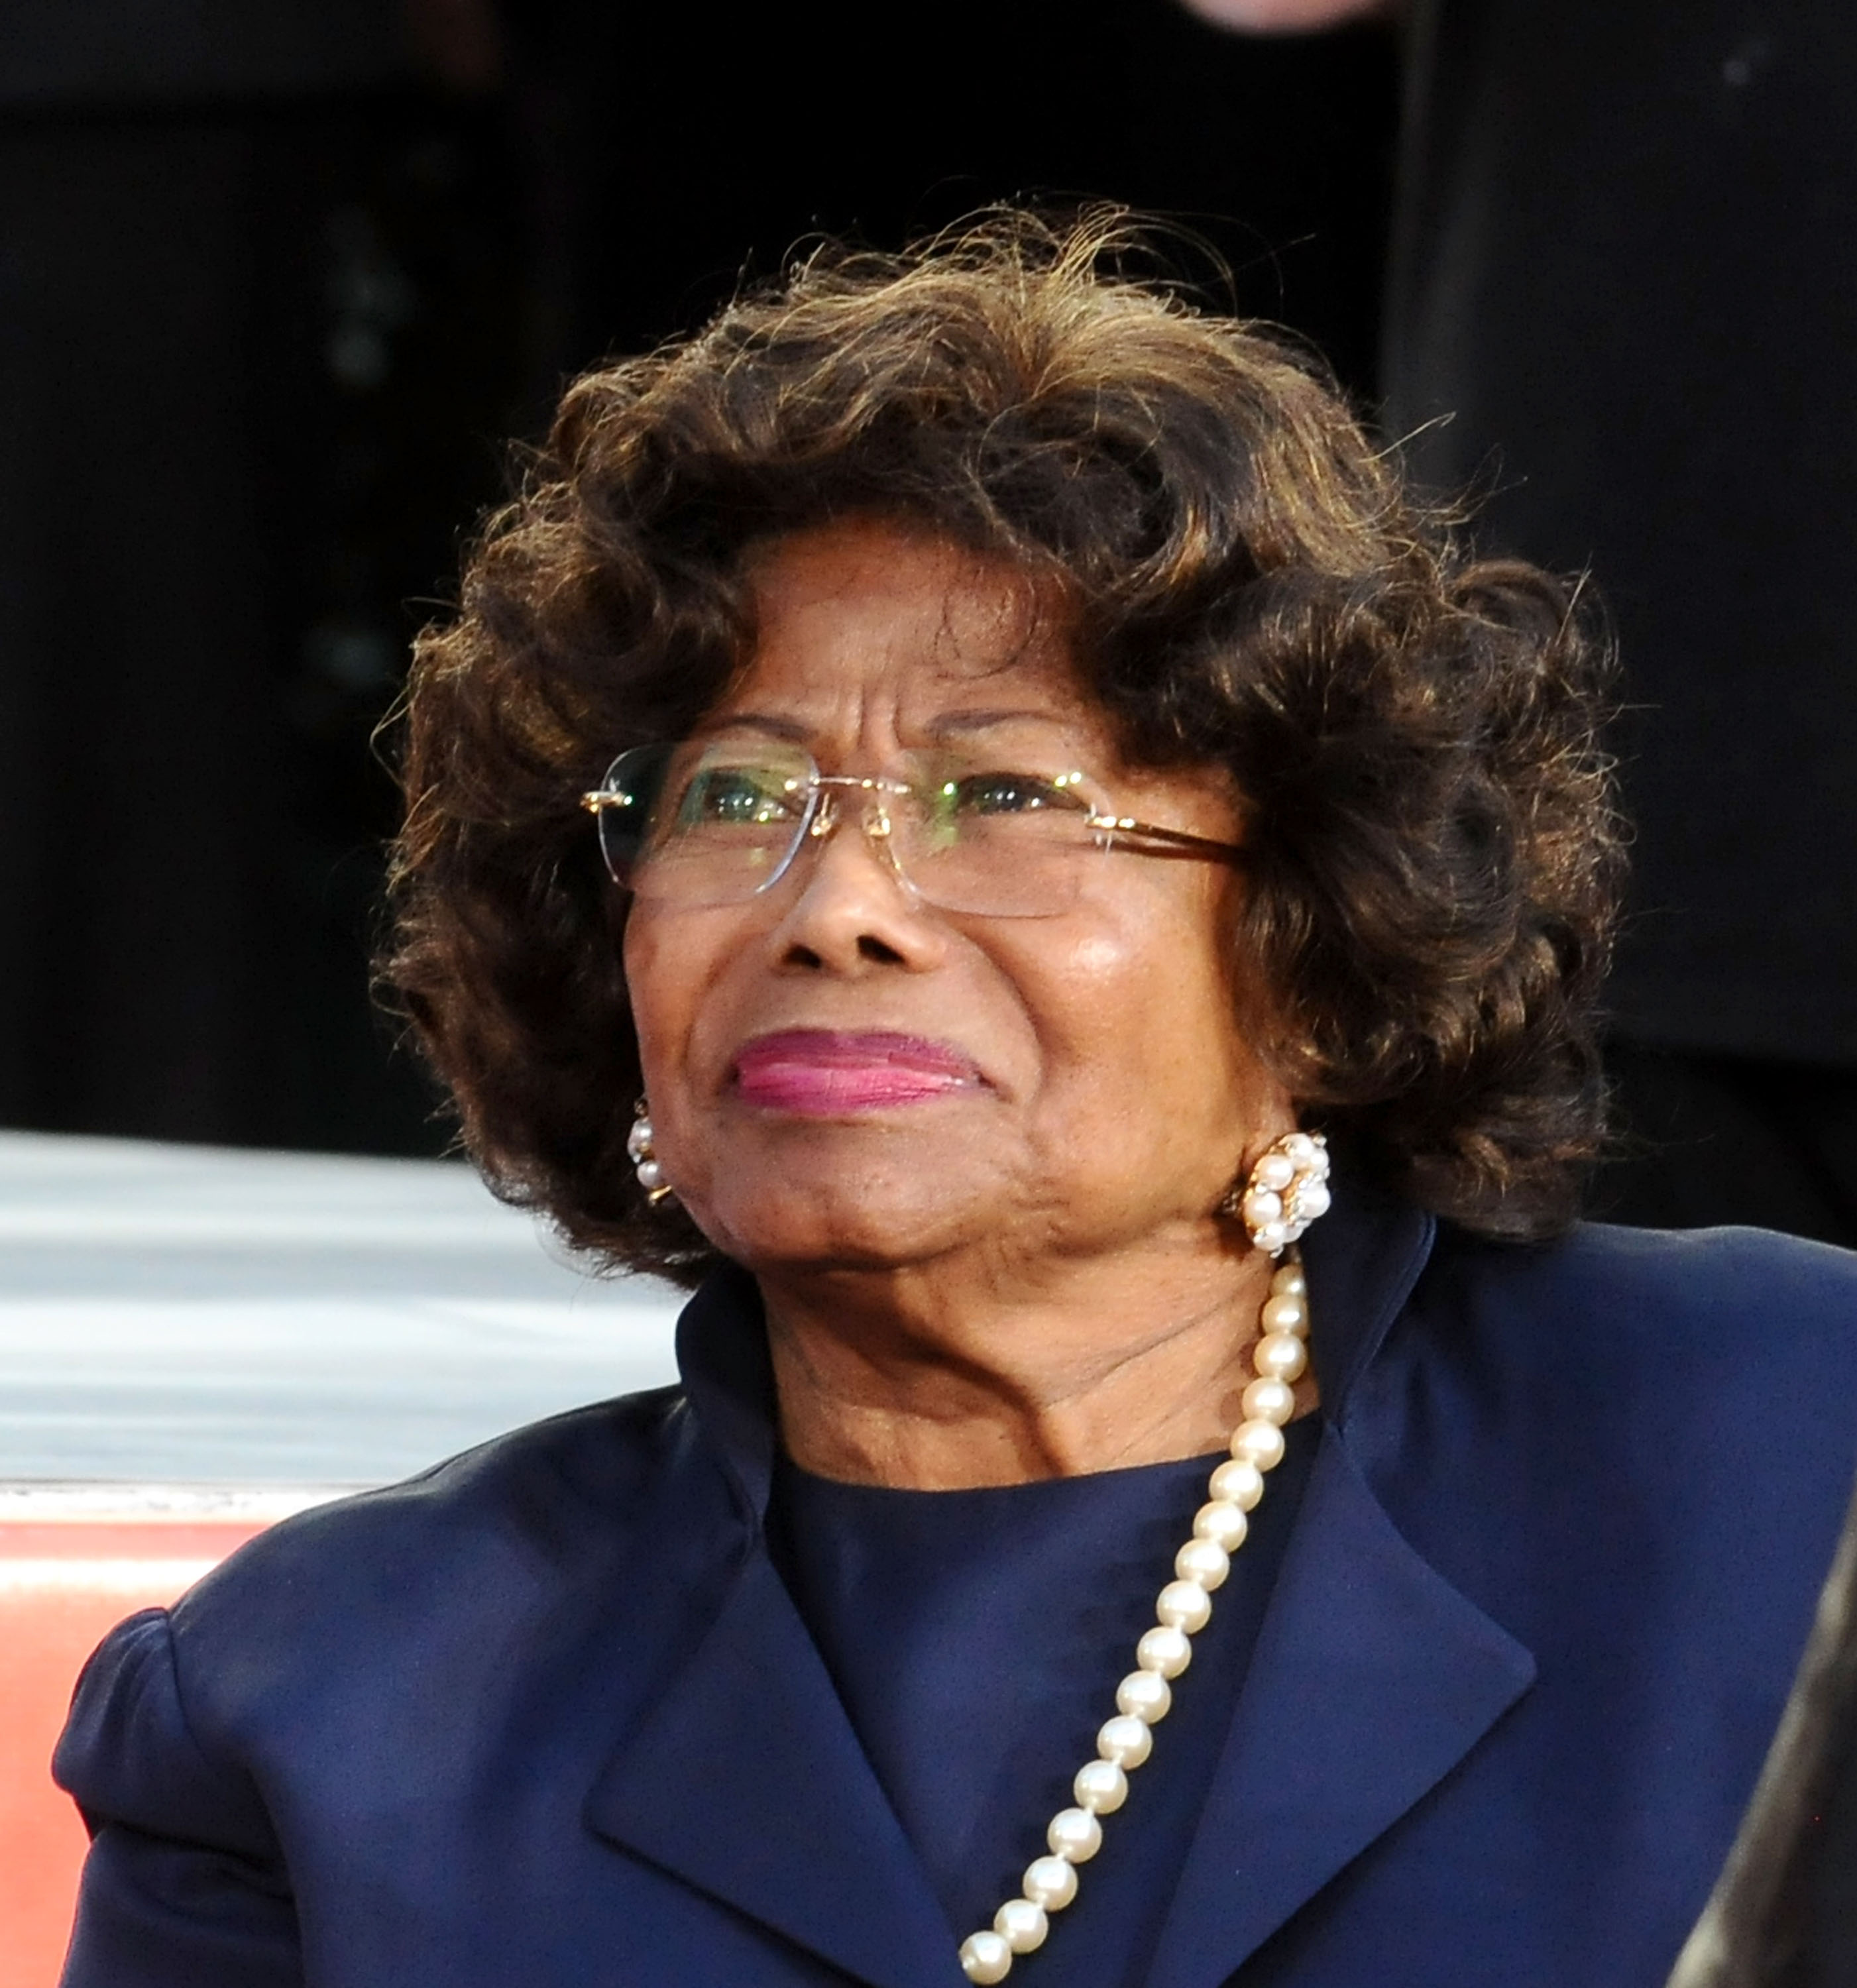 Katherine Jackson during the Michael Jackson Hand And Footprint Ceremony at Grauman's Chinese Theatre on January 26, 2012 in Hollywood, California | Source: Getty Images